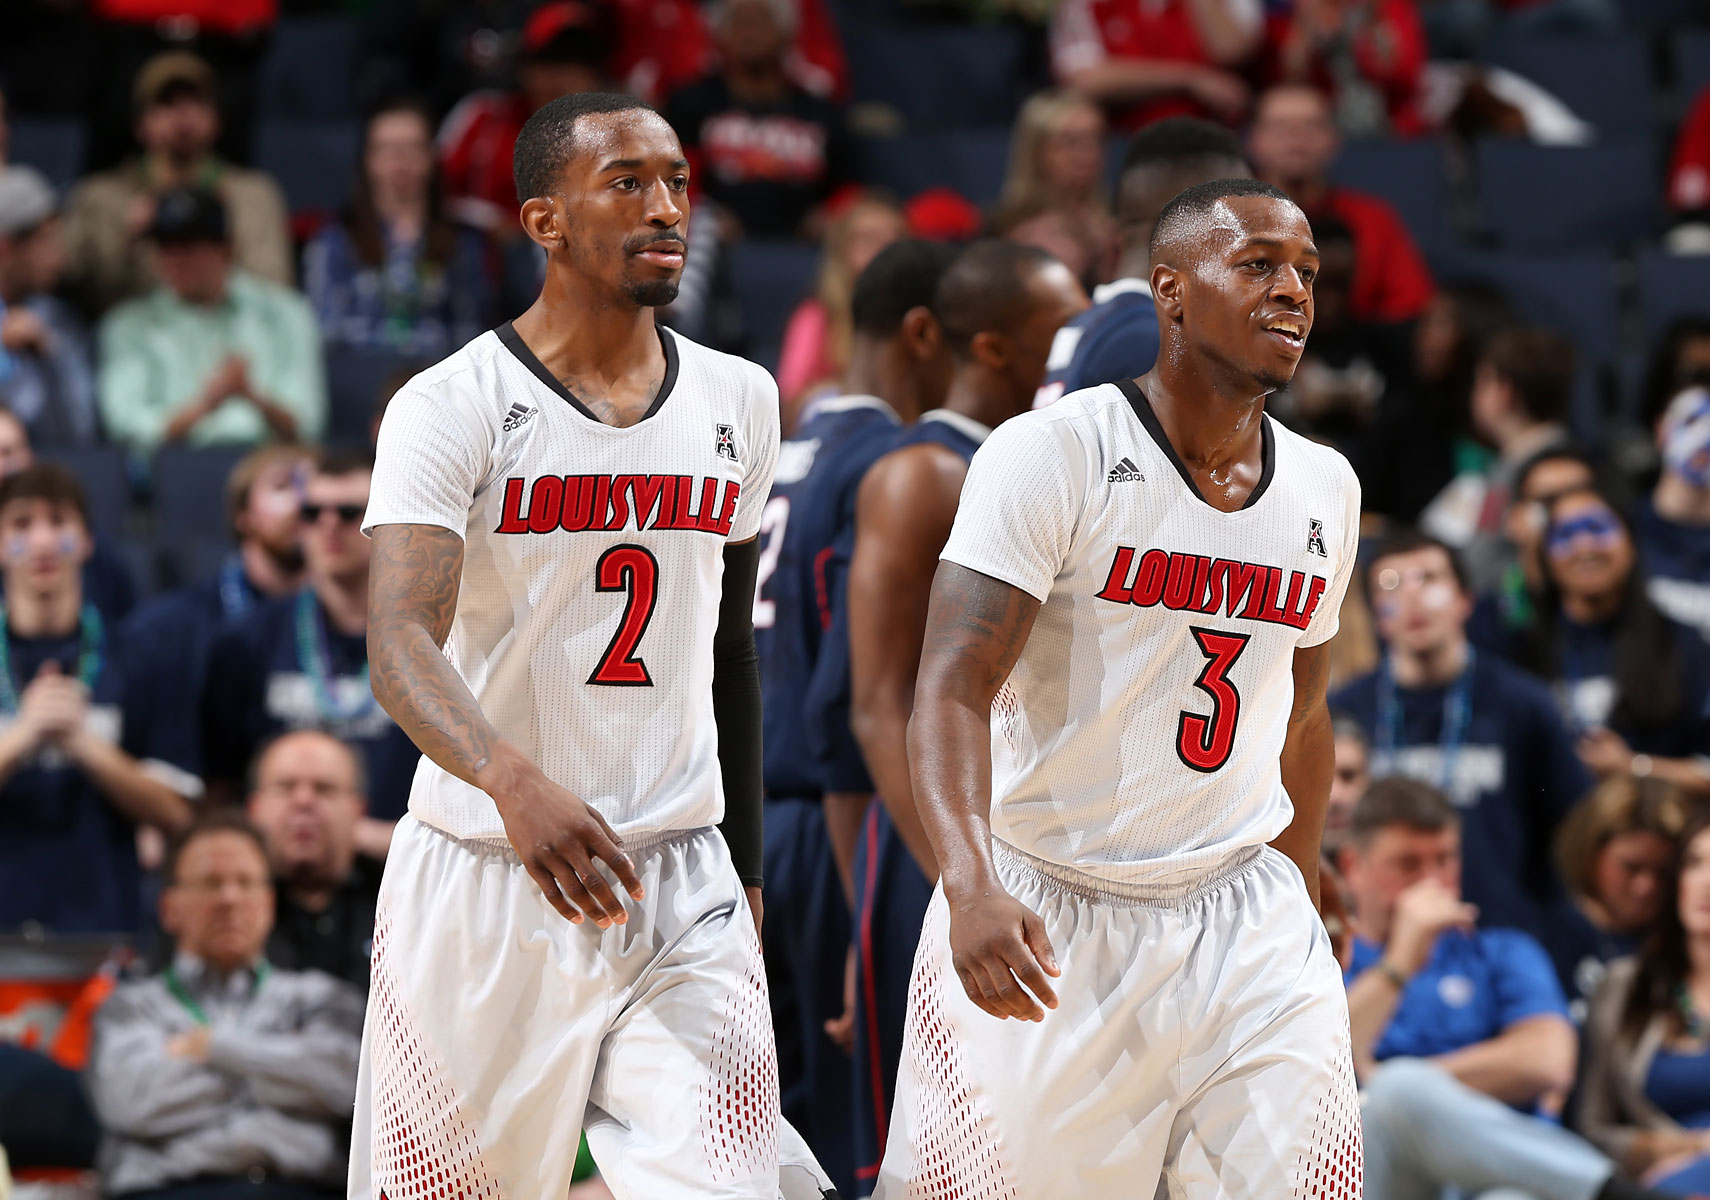 From left: Russ Smith #2 and Chris Jones #3 of the Louisville Cardinals during the Championship of the American Athletic Conference Tournament at FedExForum on March 15, 2014 in Memphis.